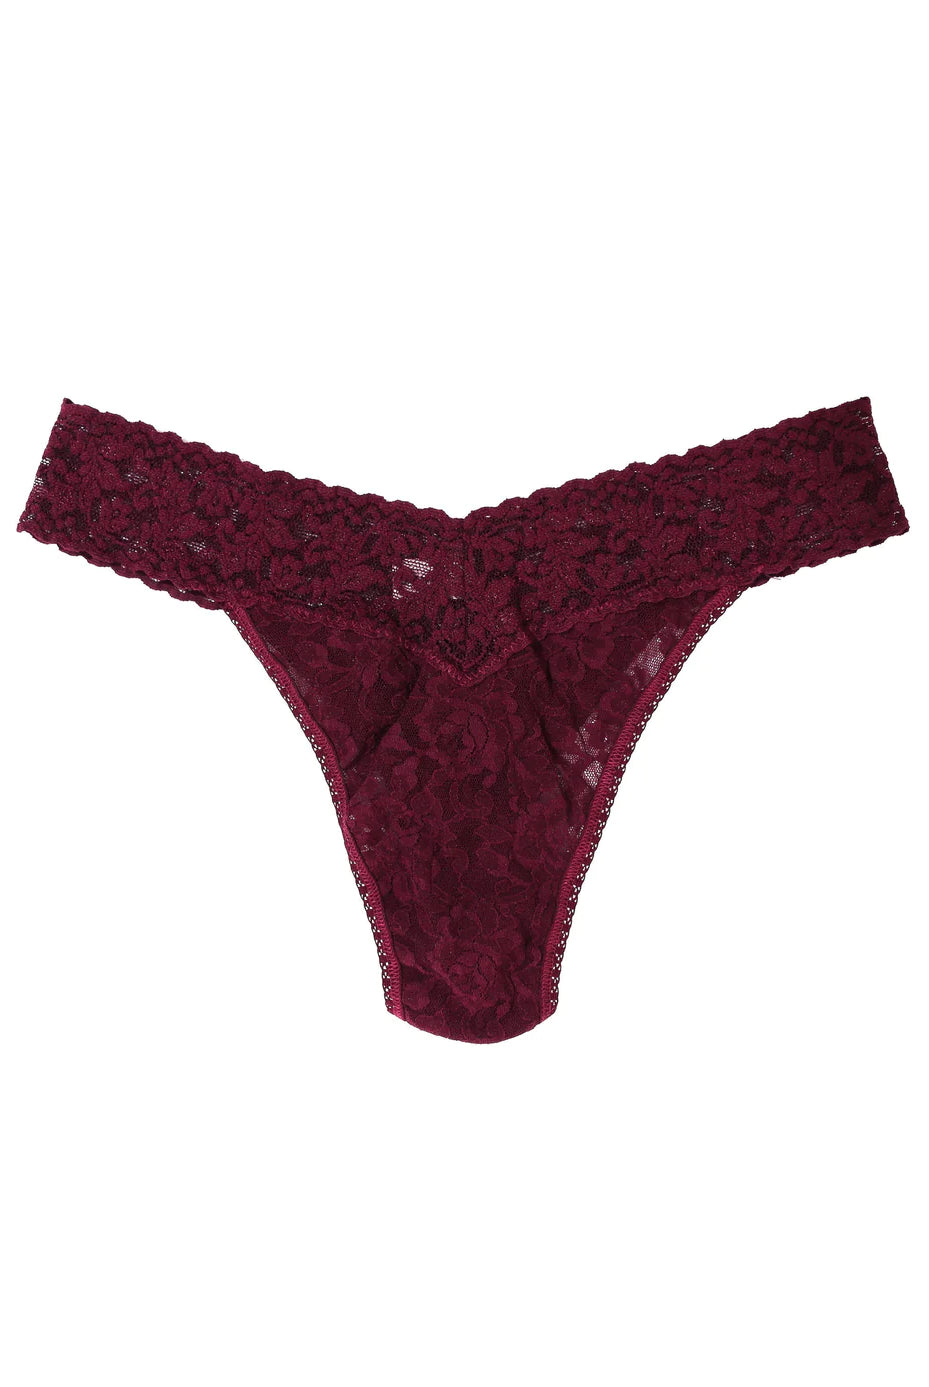 Signature Lace Original Rise Thong - Dried Cherry Red - Flirt! Luxe Lingerie & Sleepwear